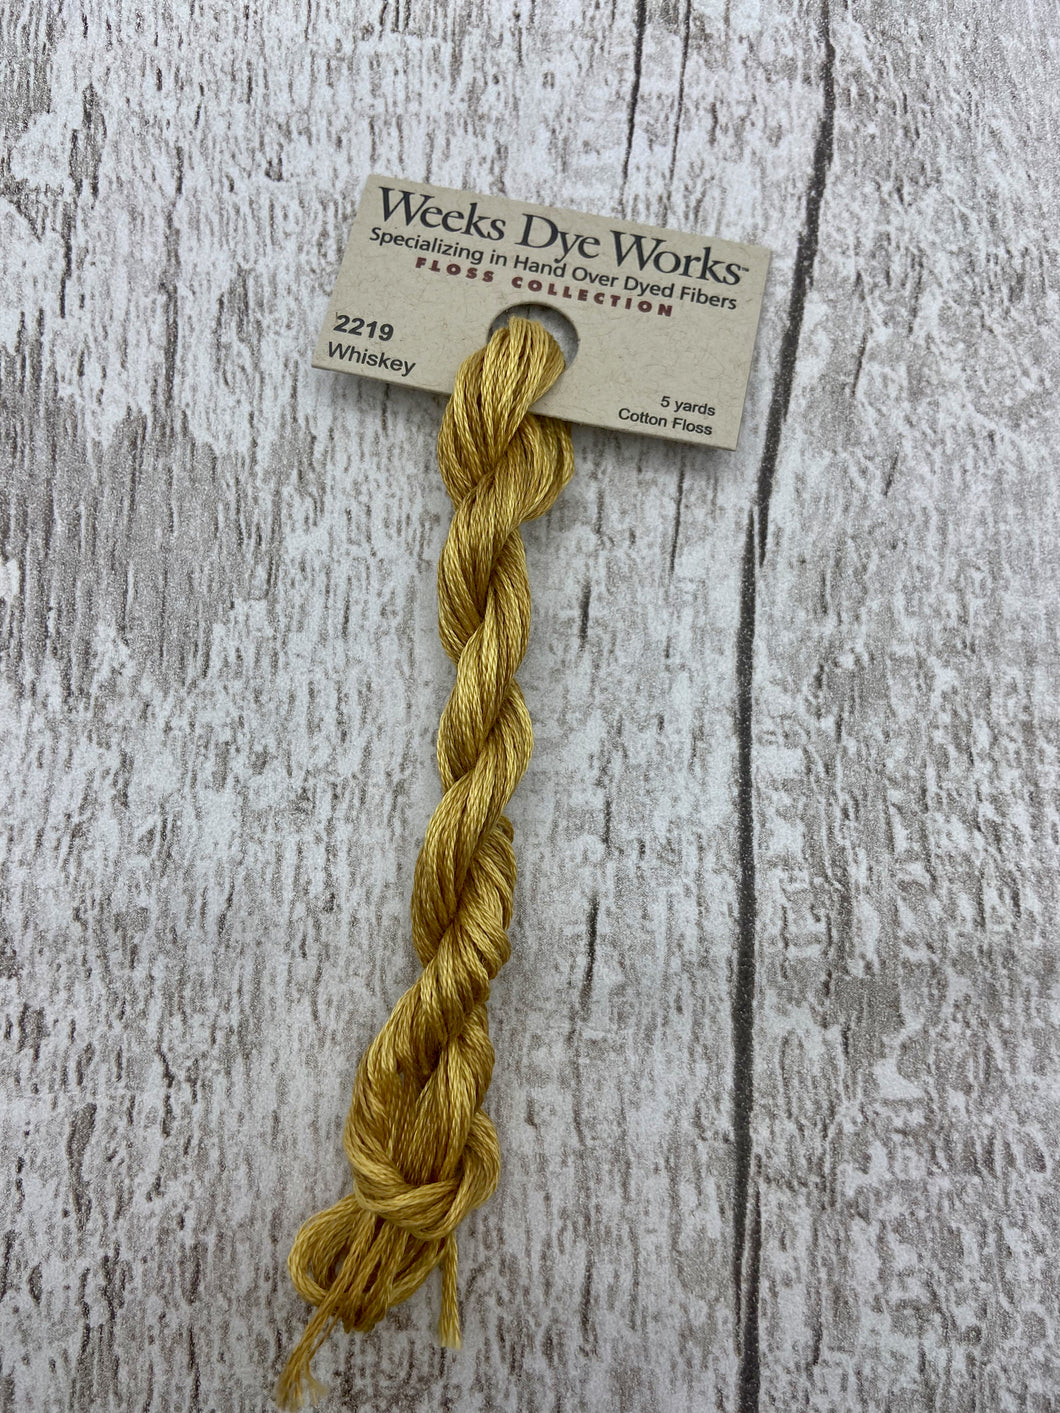 Whiskey (#2219) Weeks Dye Works, 6-strand cotton floss